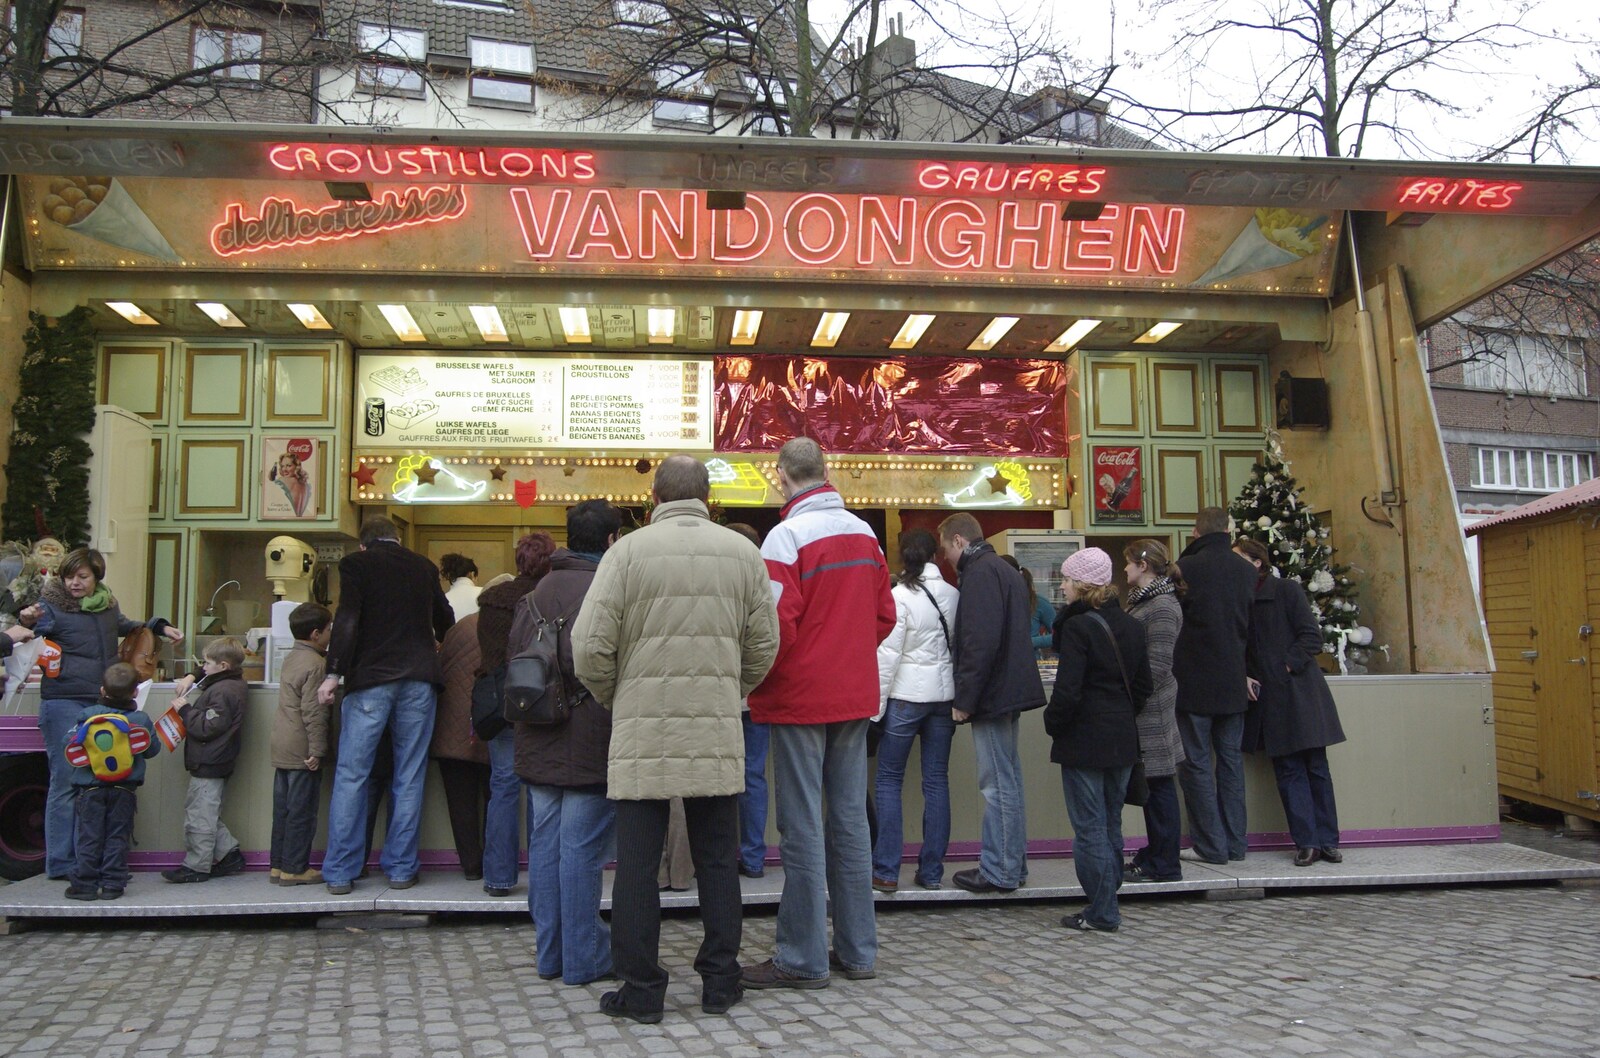 A crowd at Vandonghen waffles from The Christmas Markets of Brussels, Belgium - 1st January 2007